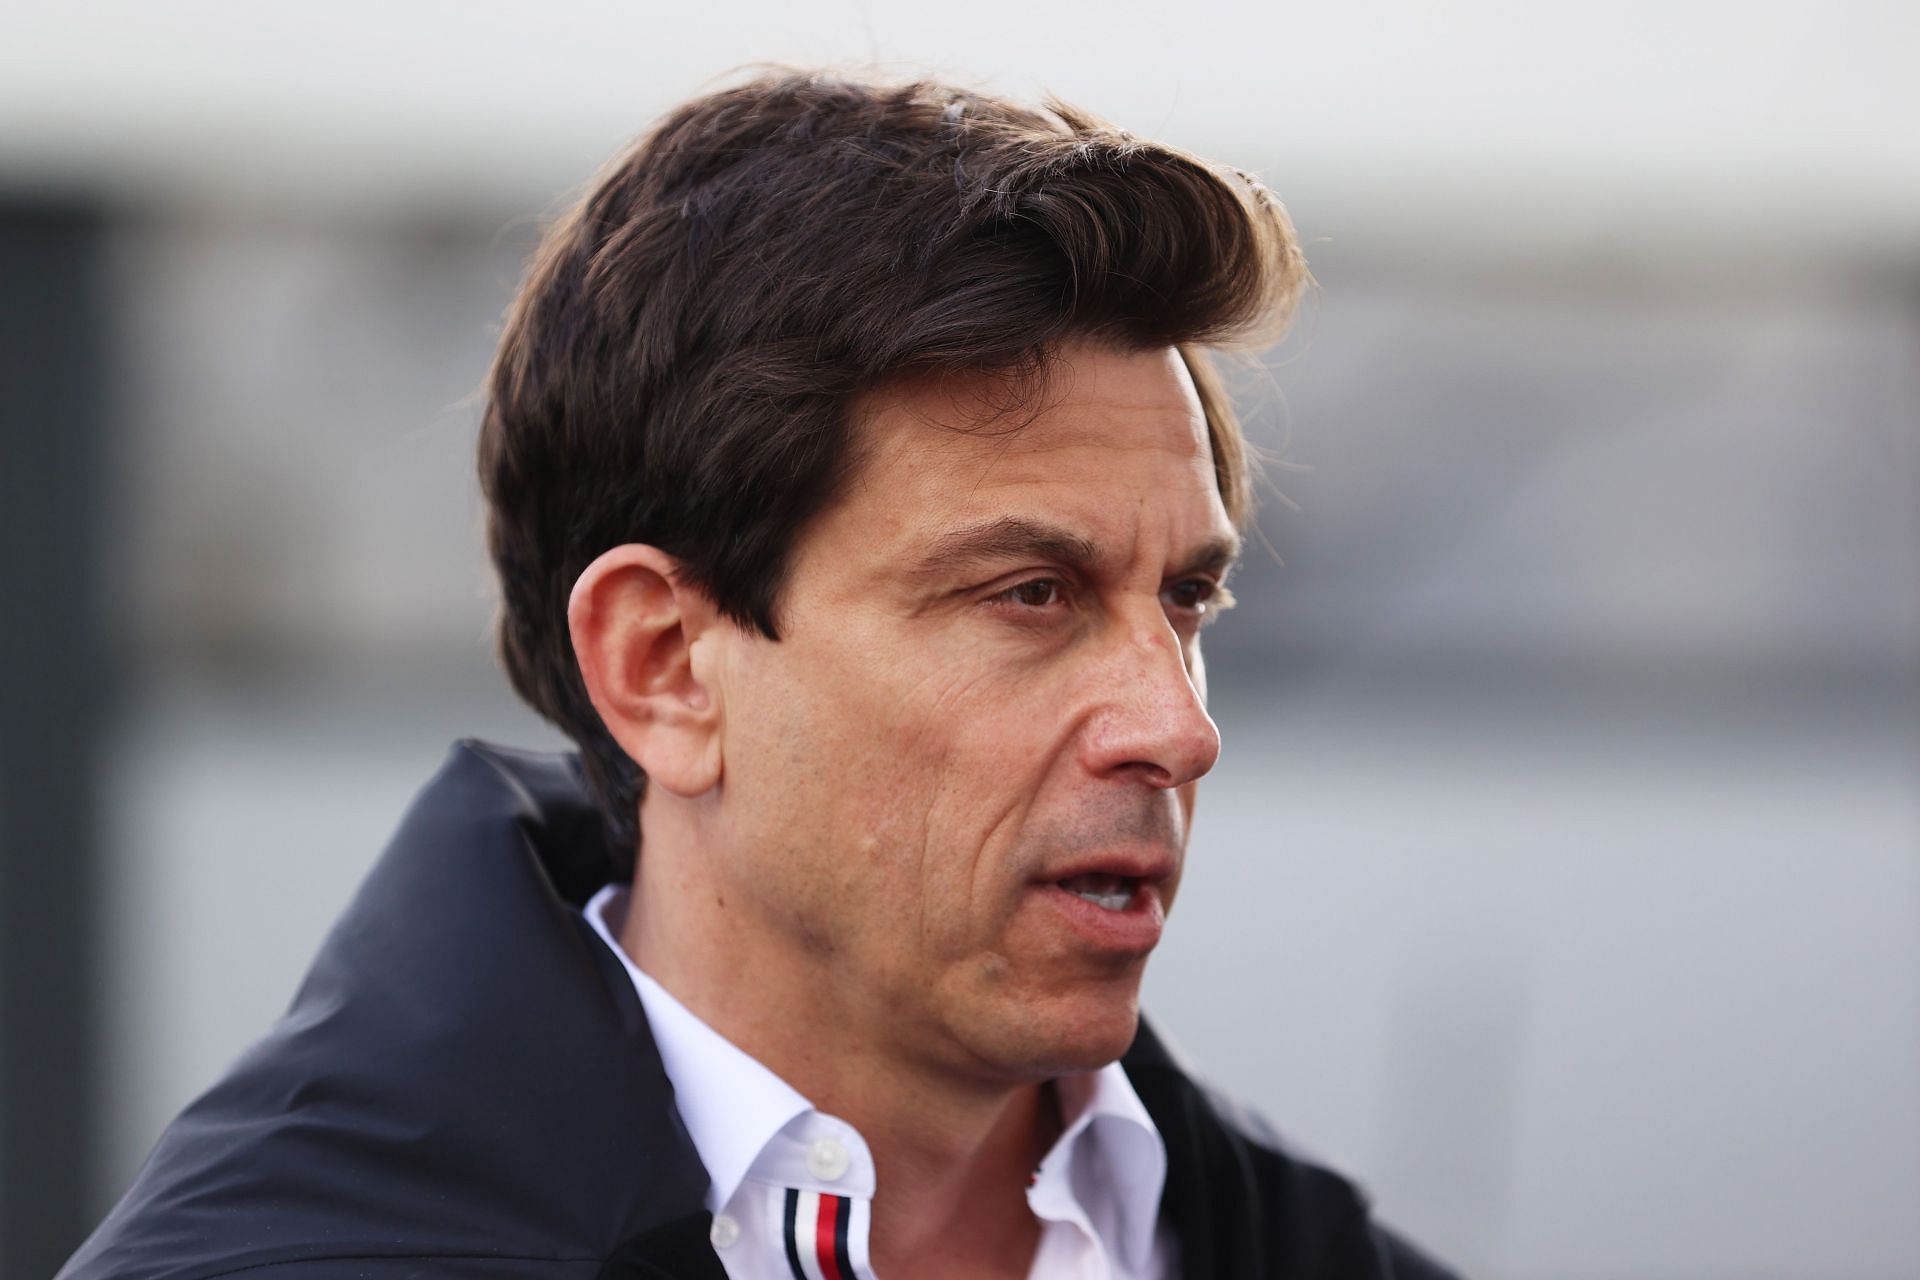 Mercedes GP executive director Toto Wolff looks on in the Paddock before final practice ahead of the F1 Grand Prix of Australia at Melbourne Grand Prix Circuit on April 09, 2022, in Melbourne, Australia. (Photo by Robert Cianflone/Getty Images)